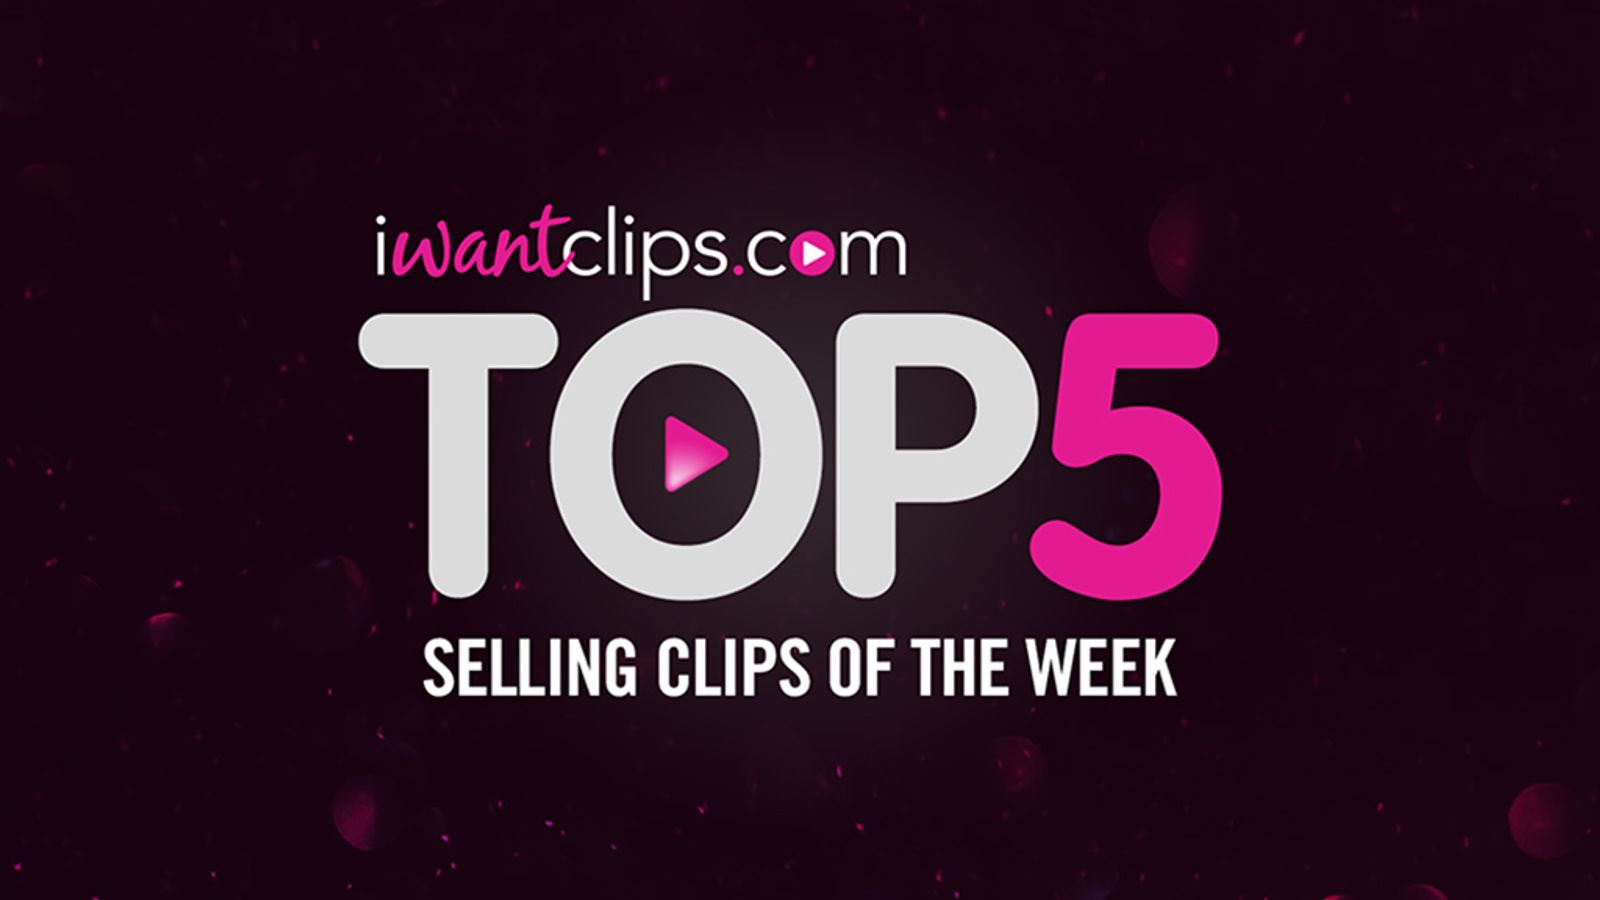 Powerful Women Find A Home At iWantClips